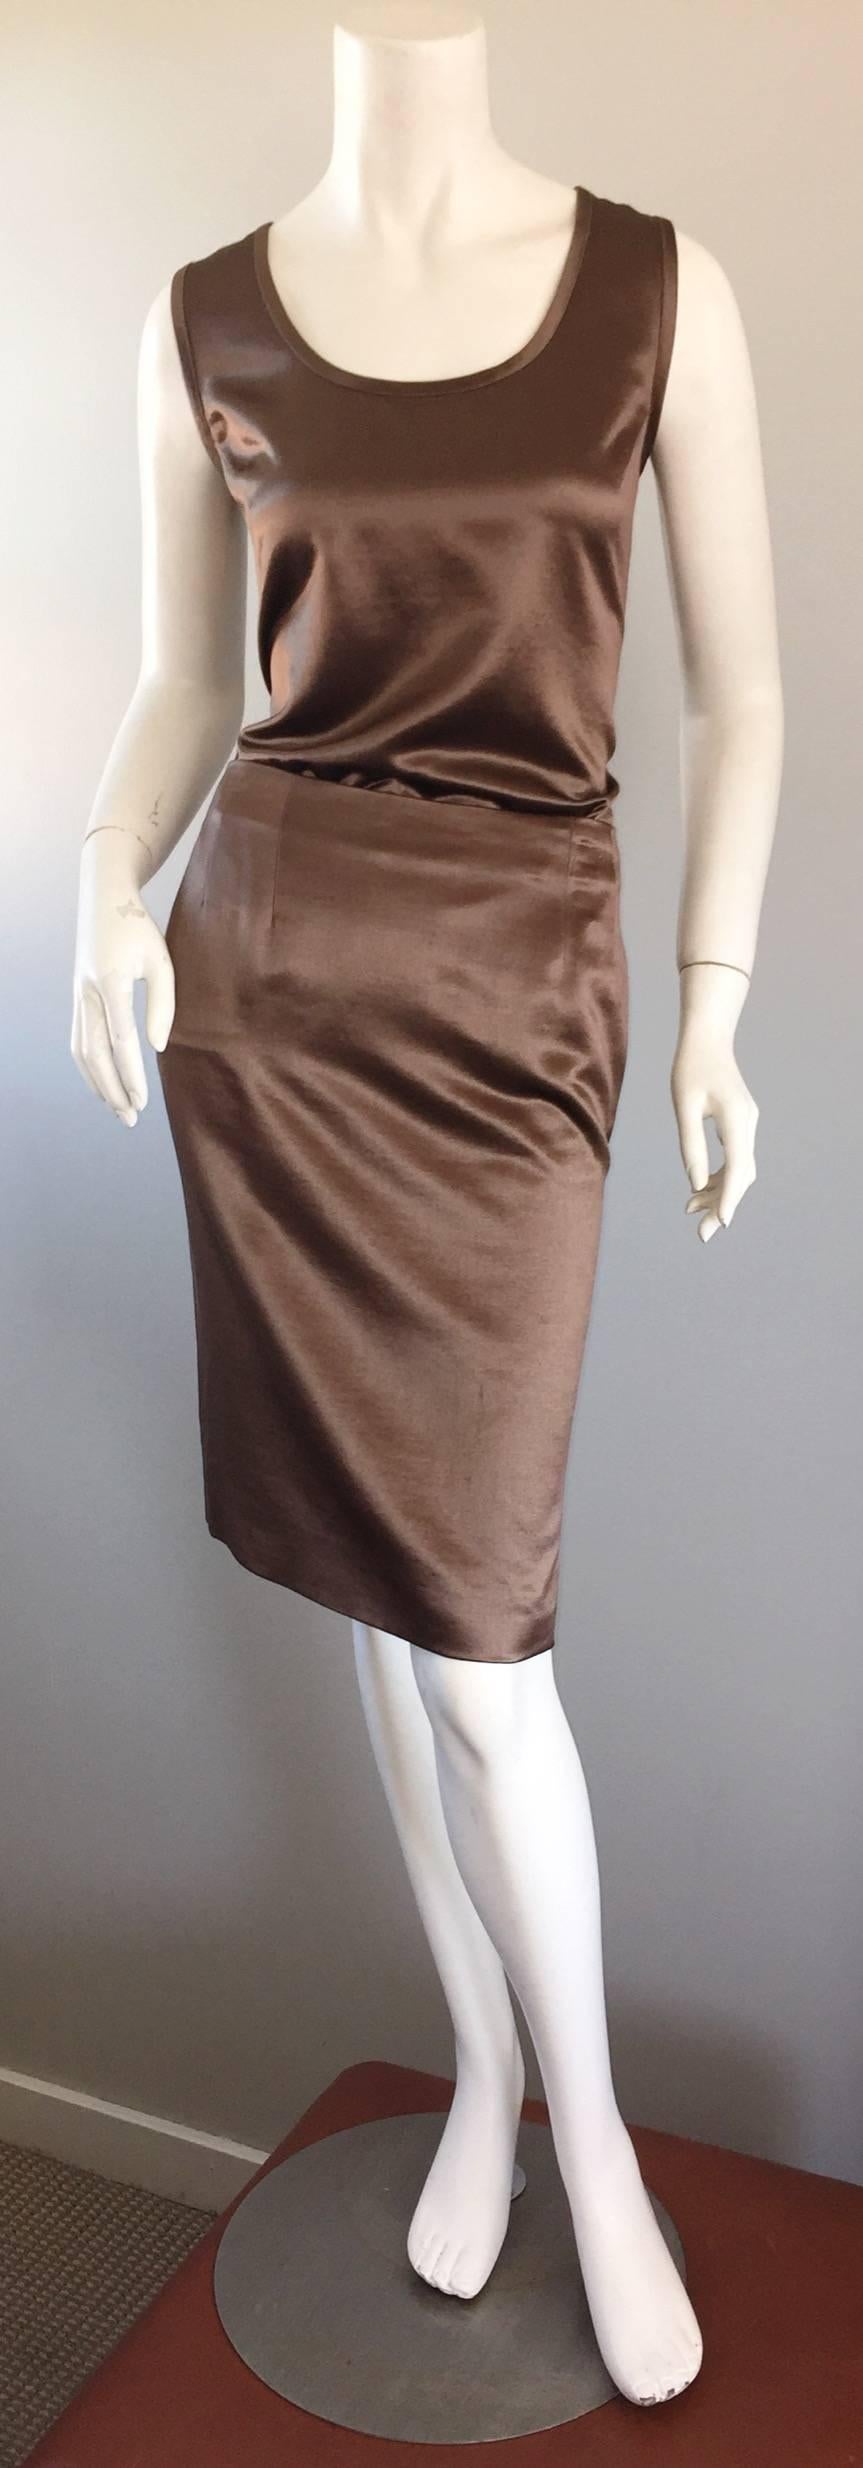 Chic vintage GEOFFREY BEENE for NEIMAN MARCUS brown silk fitted skirt and shell blouse, and slate gray / black matching jacket ensemble! Wonderful fitted silhouette one would expect from this celebrated American designer! Blouse and skirt look like